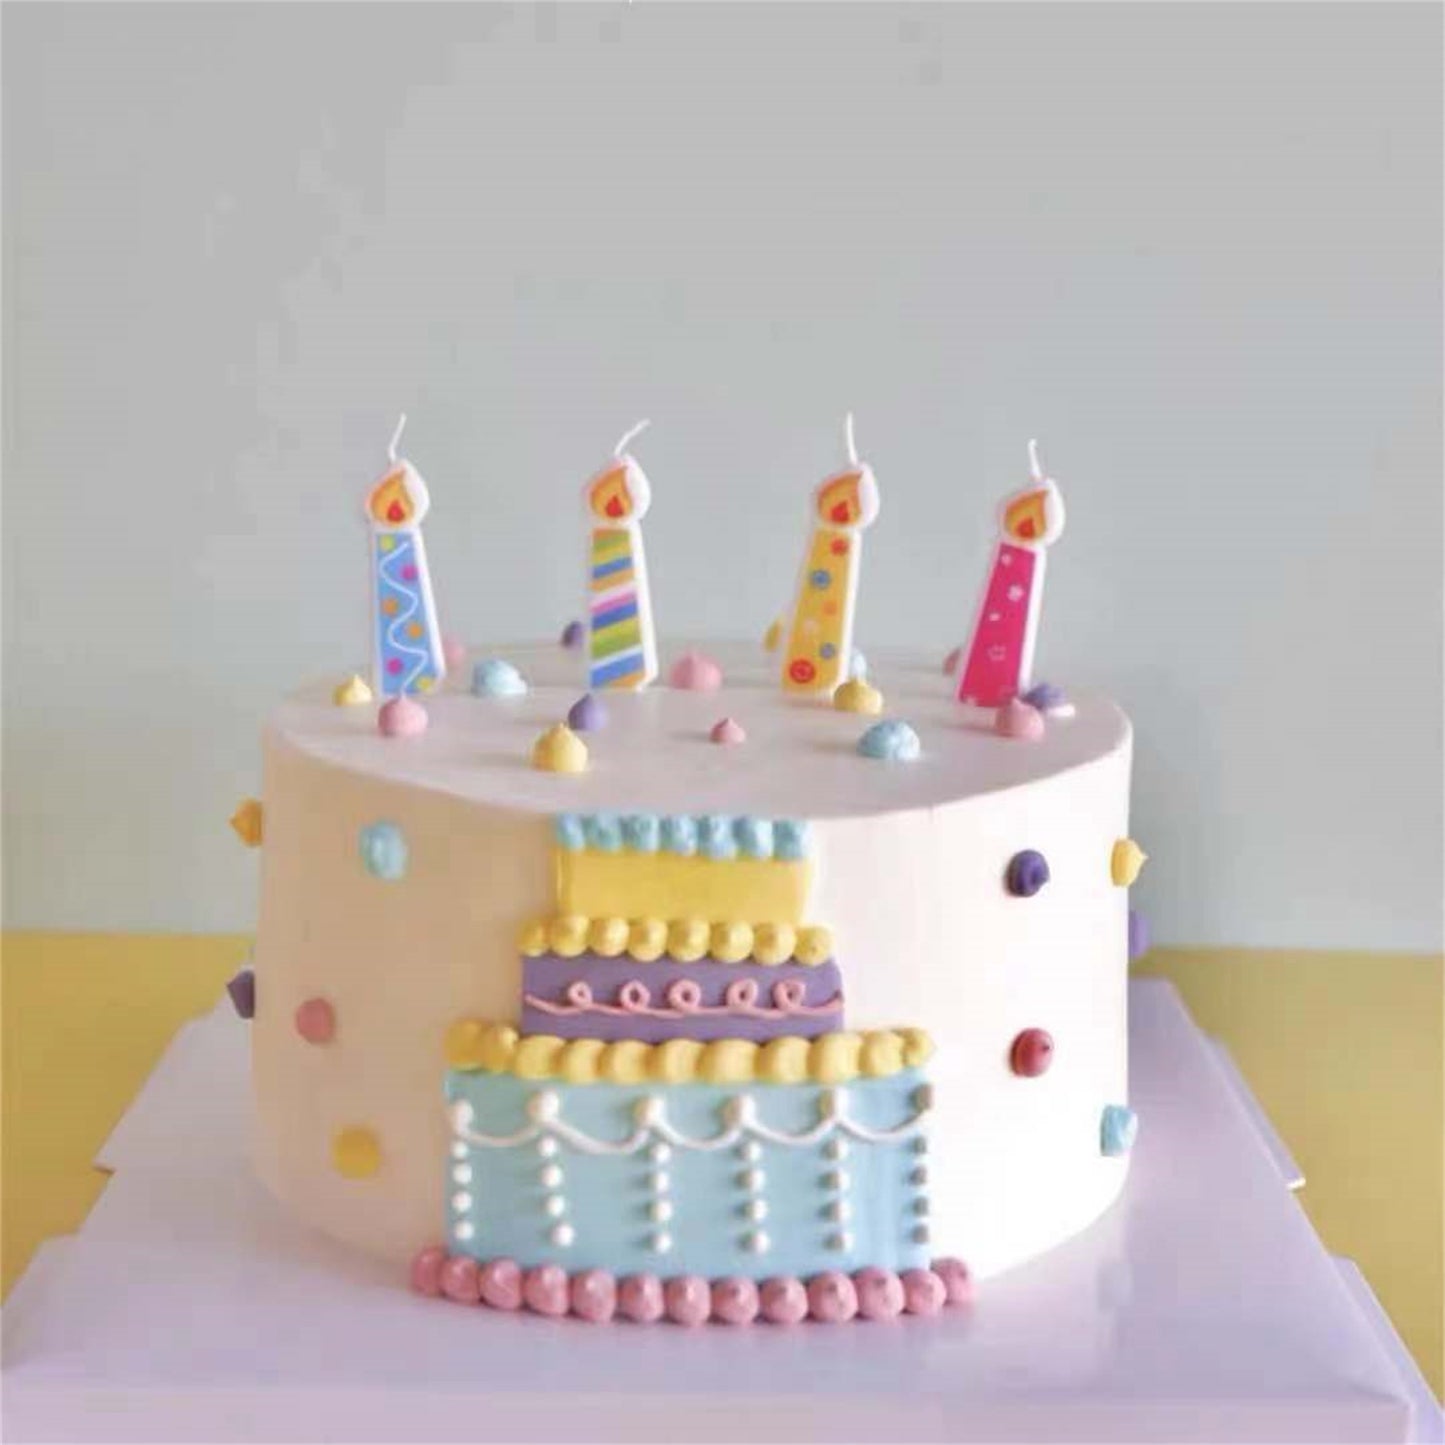 Retro colored print birthday candles, 5 coated colored candles